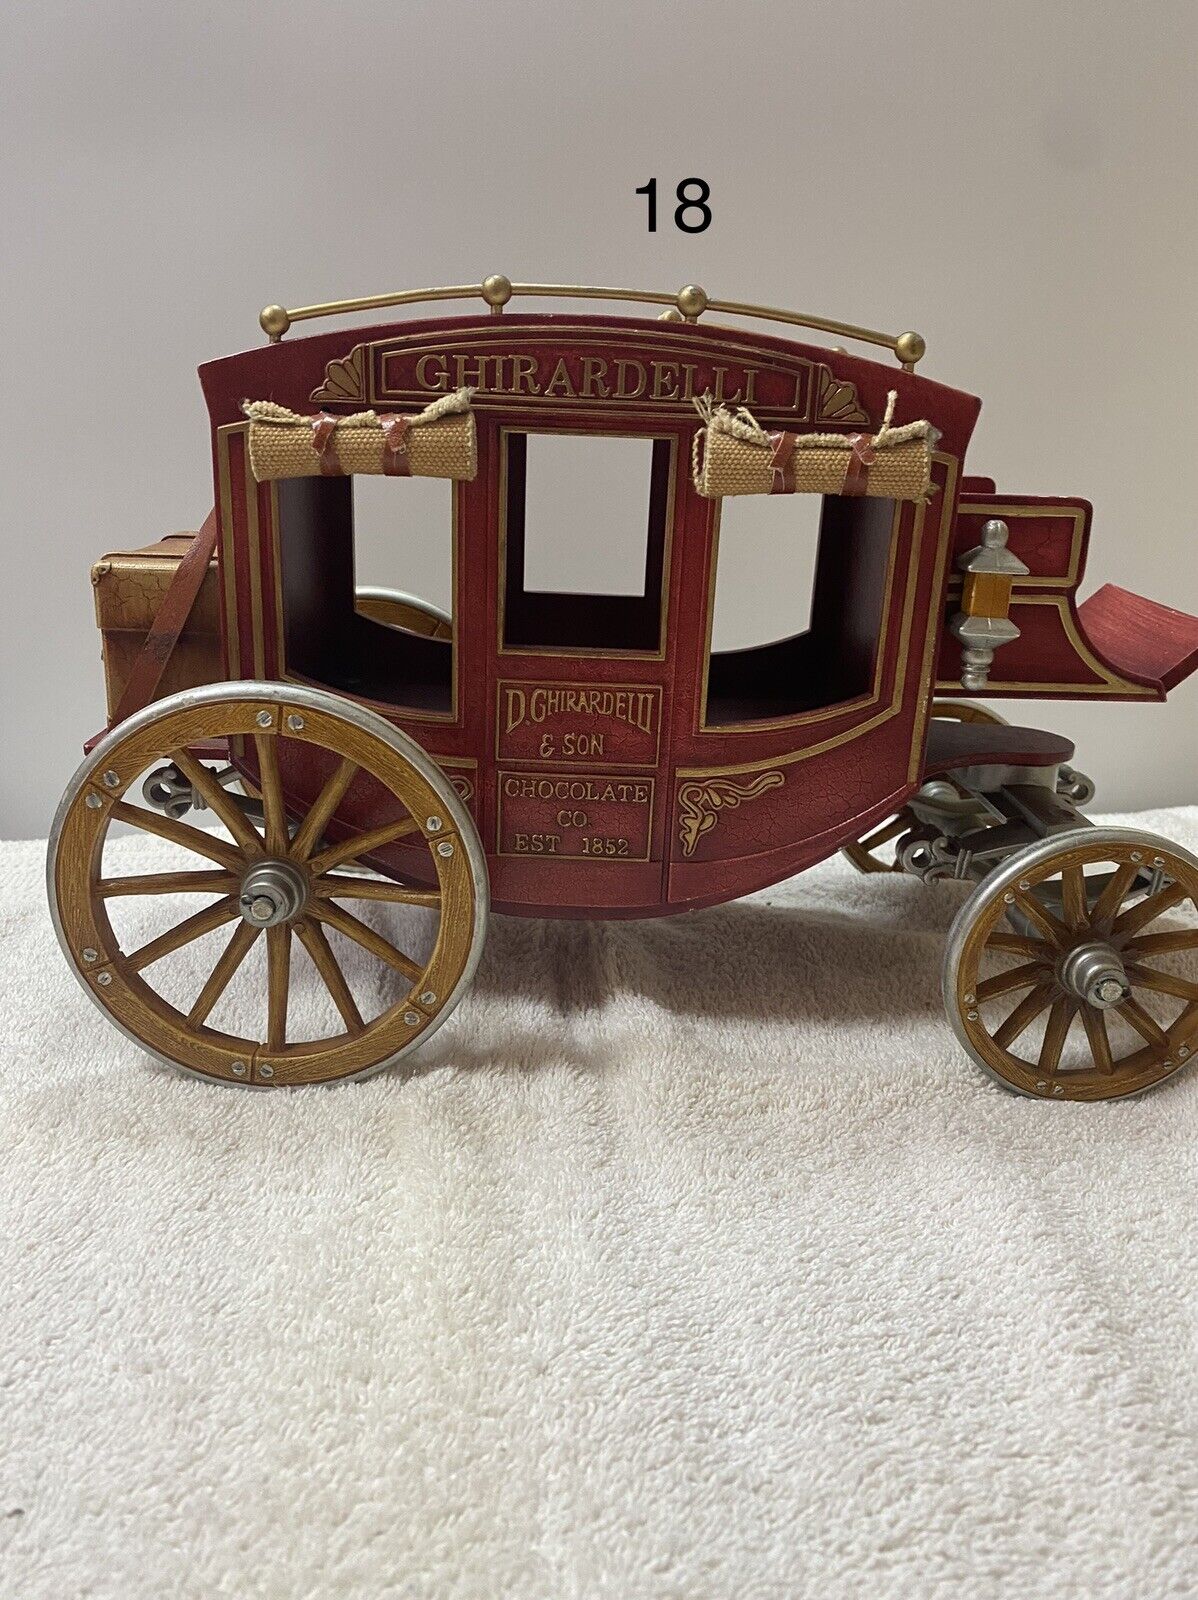 Vintage Ghirardelli & Sons San Francisco Chocolate Co. Stagecoach.